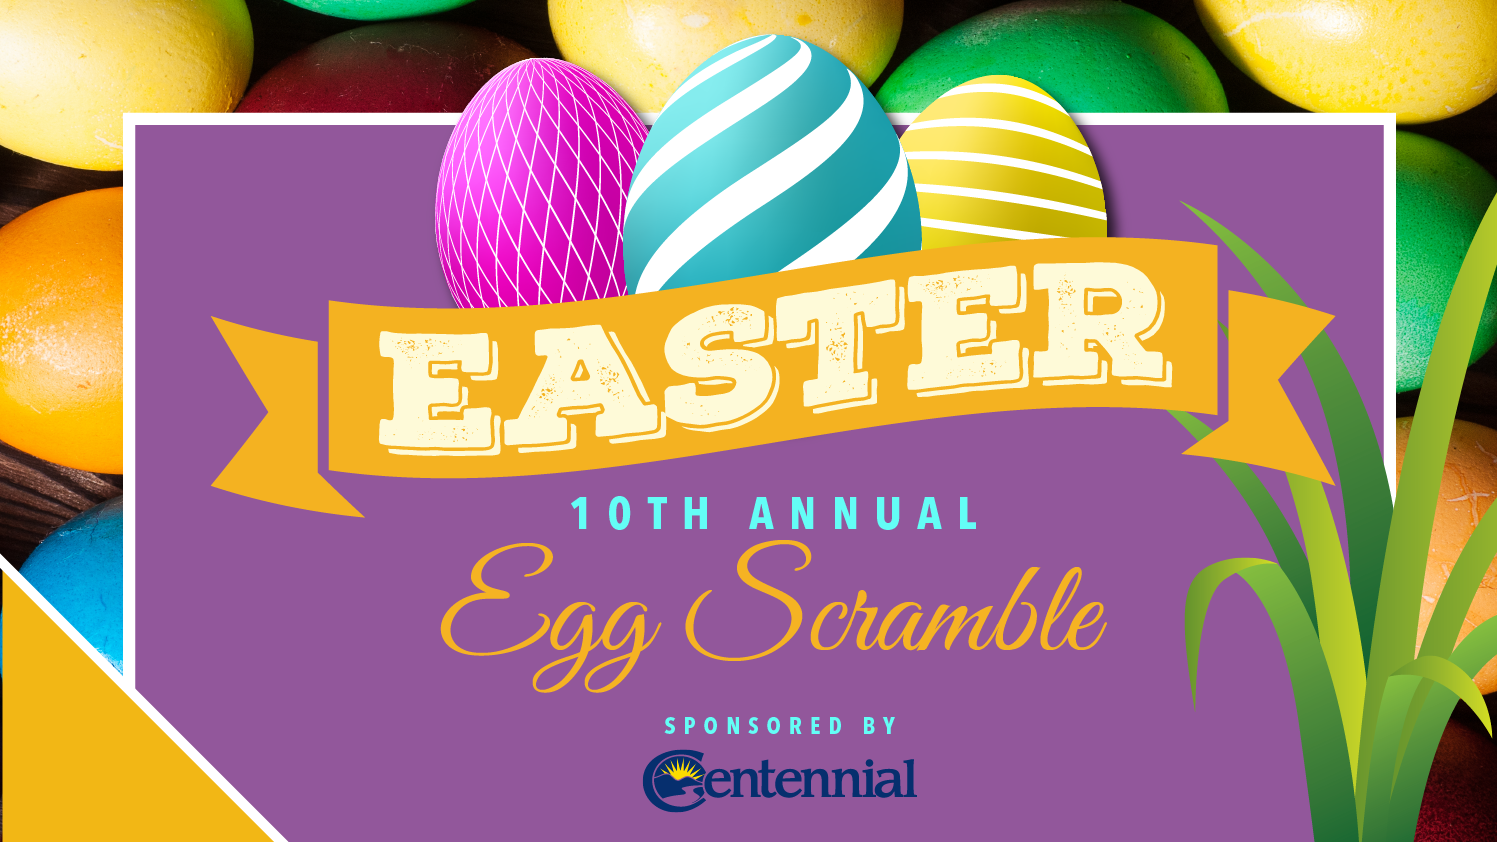 Join Us for the 10th Annual Egg Scramble